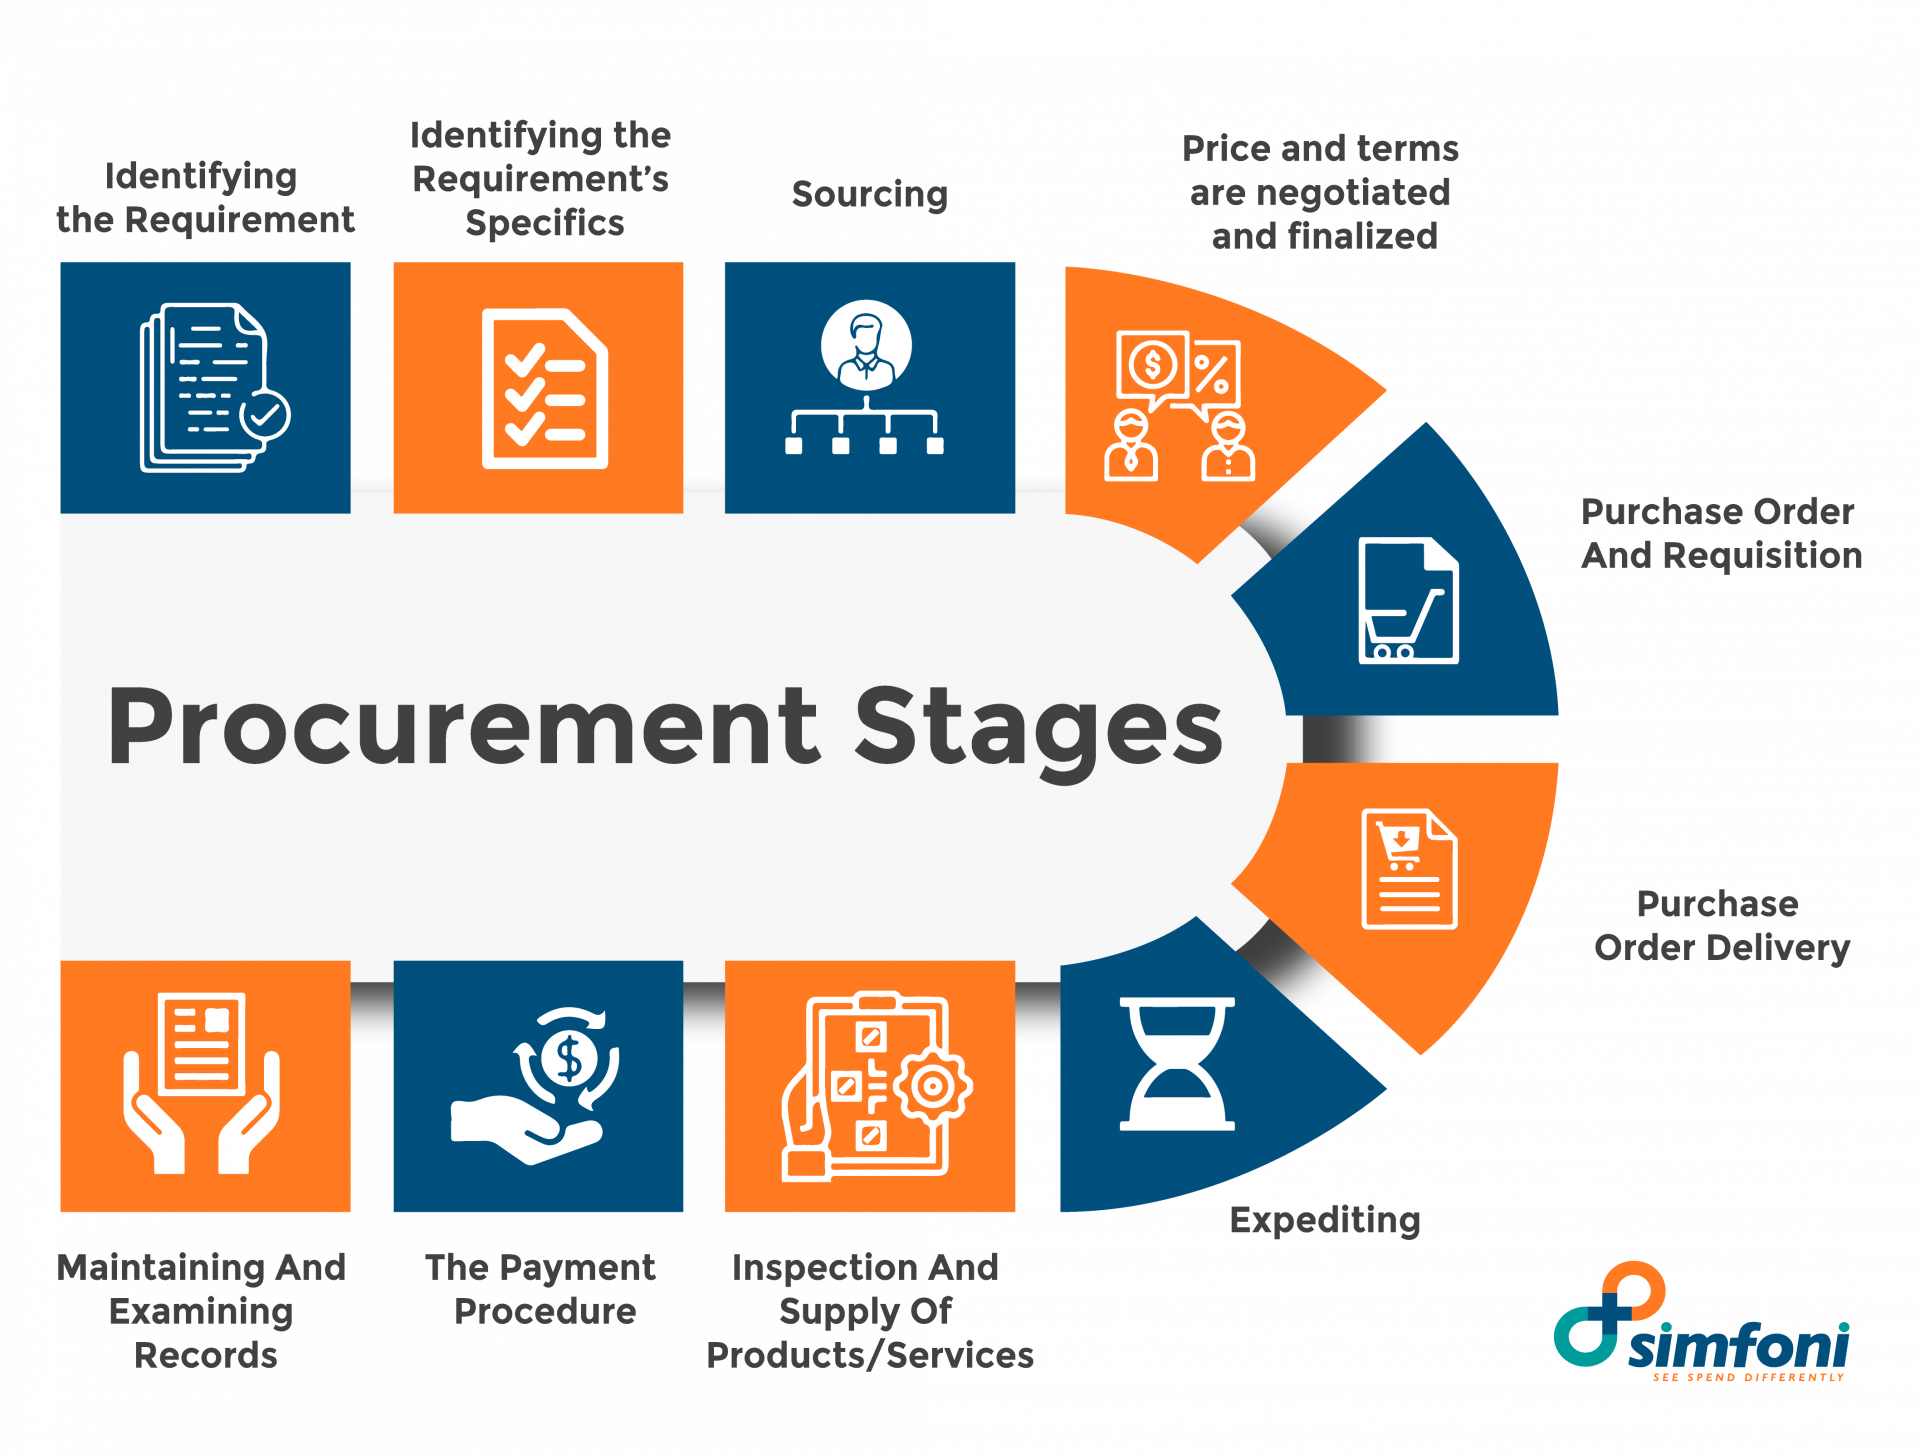 The stages of procurement